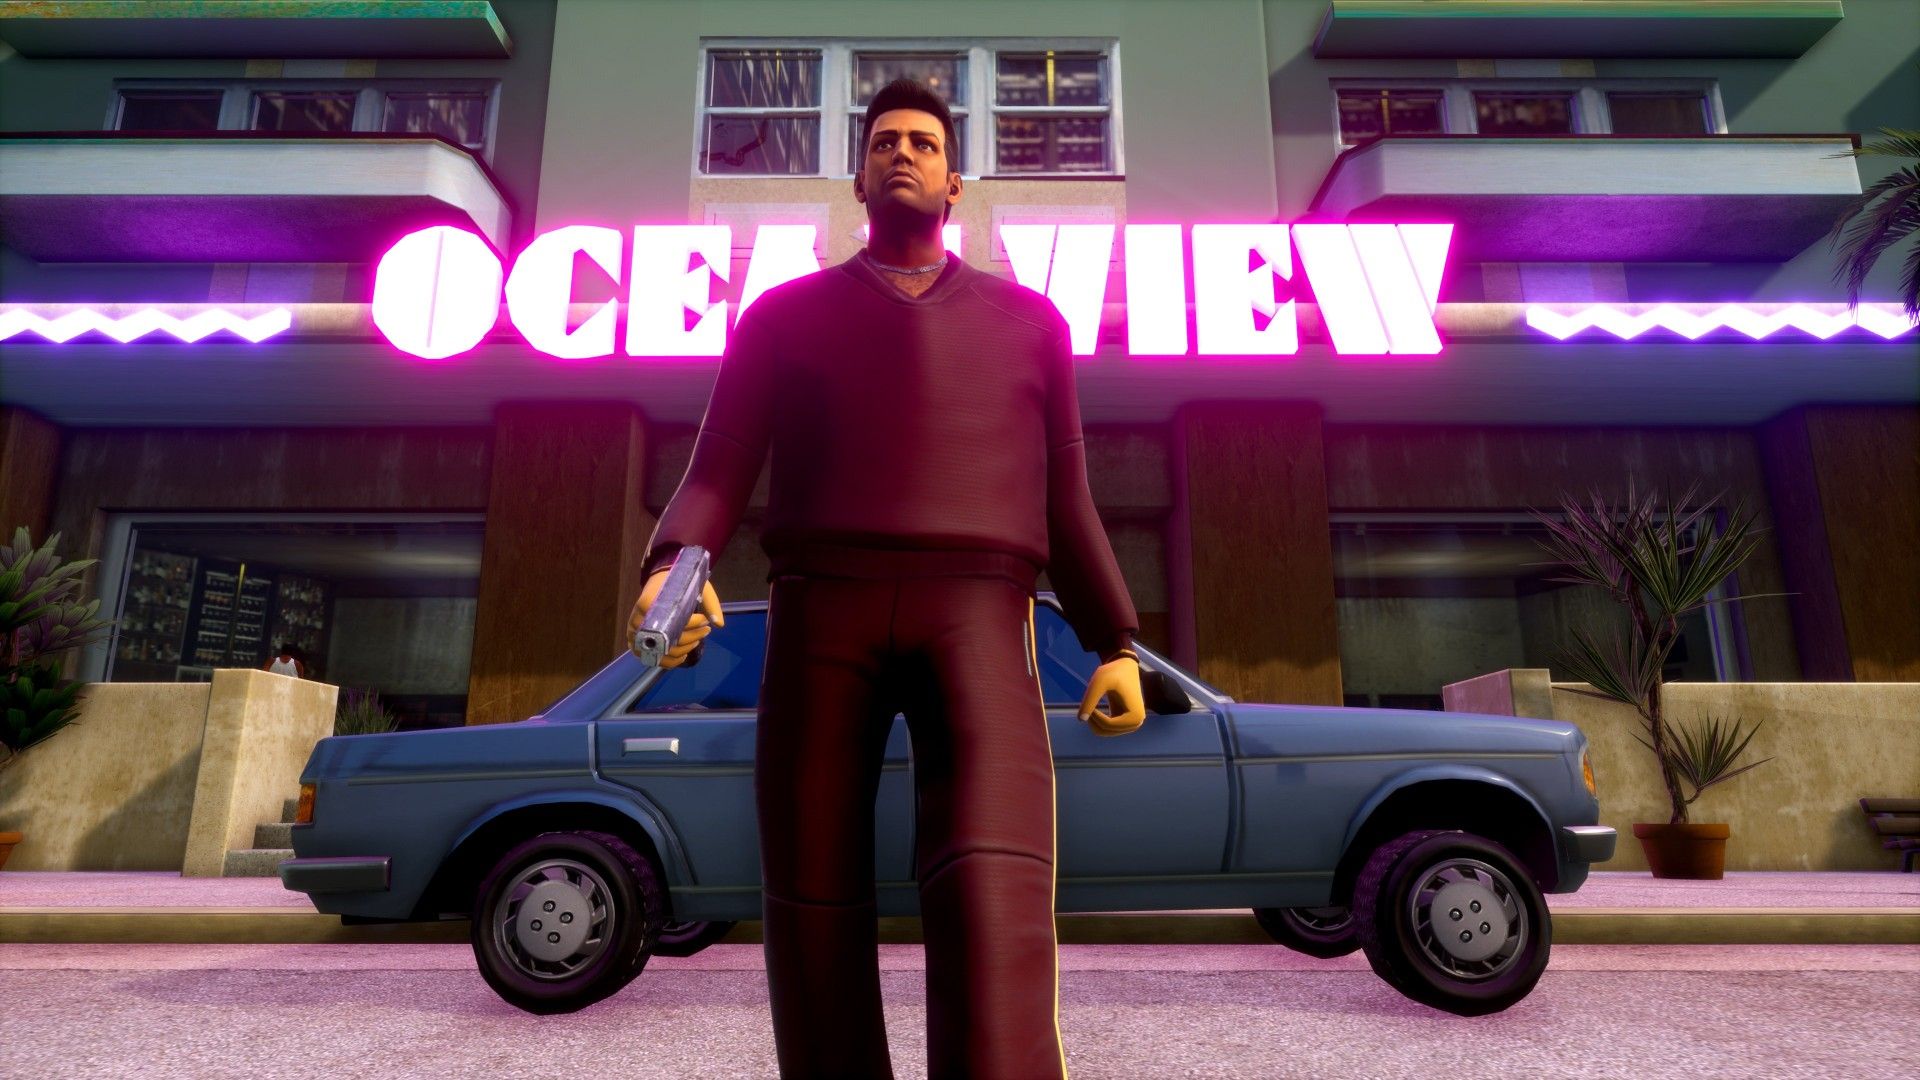 New GTA Trilogy Screenshots Appear On Xbox Store - Vice City